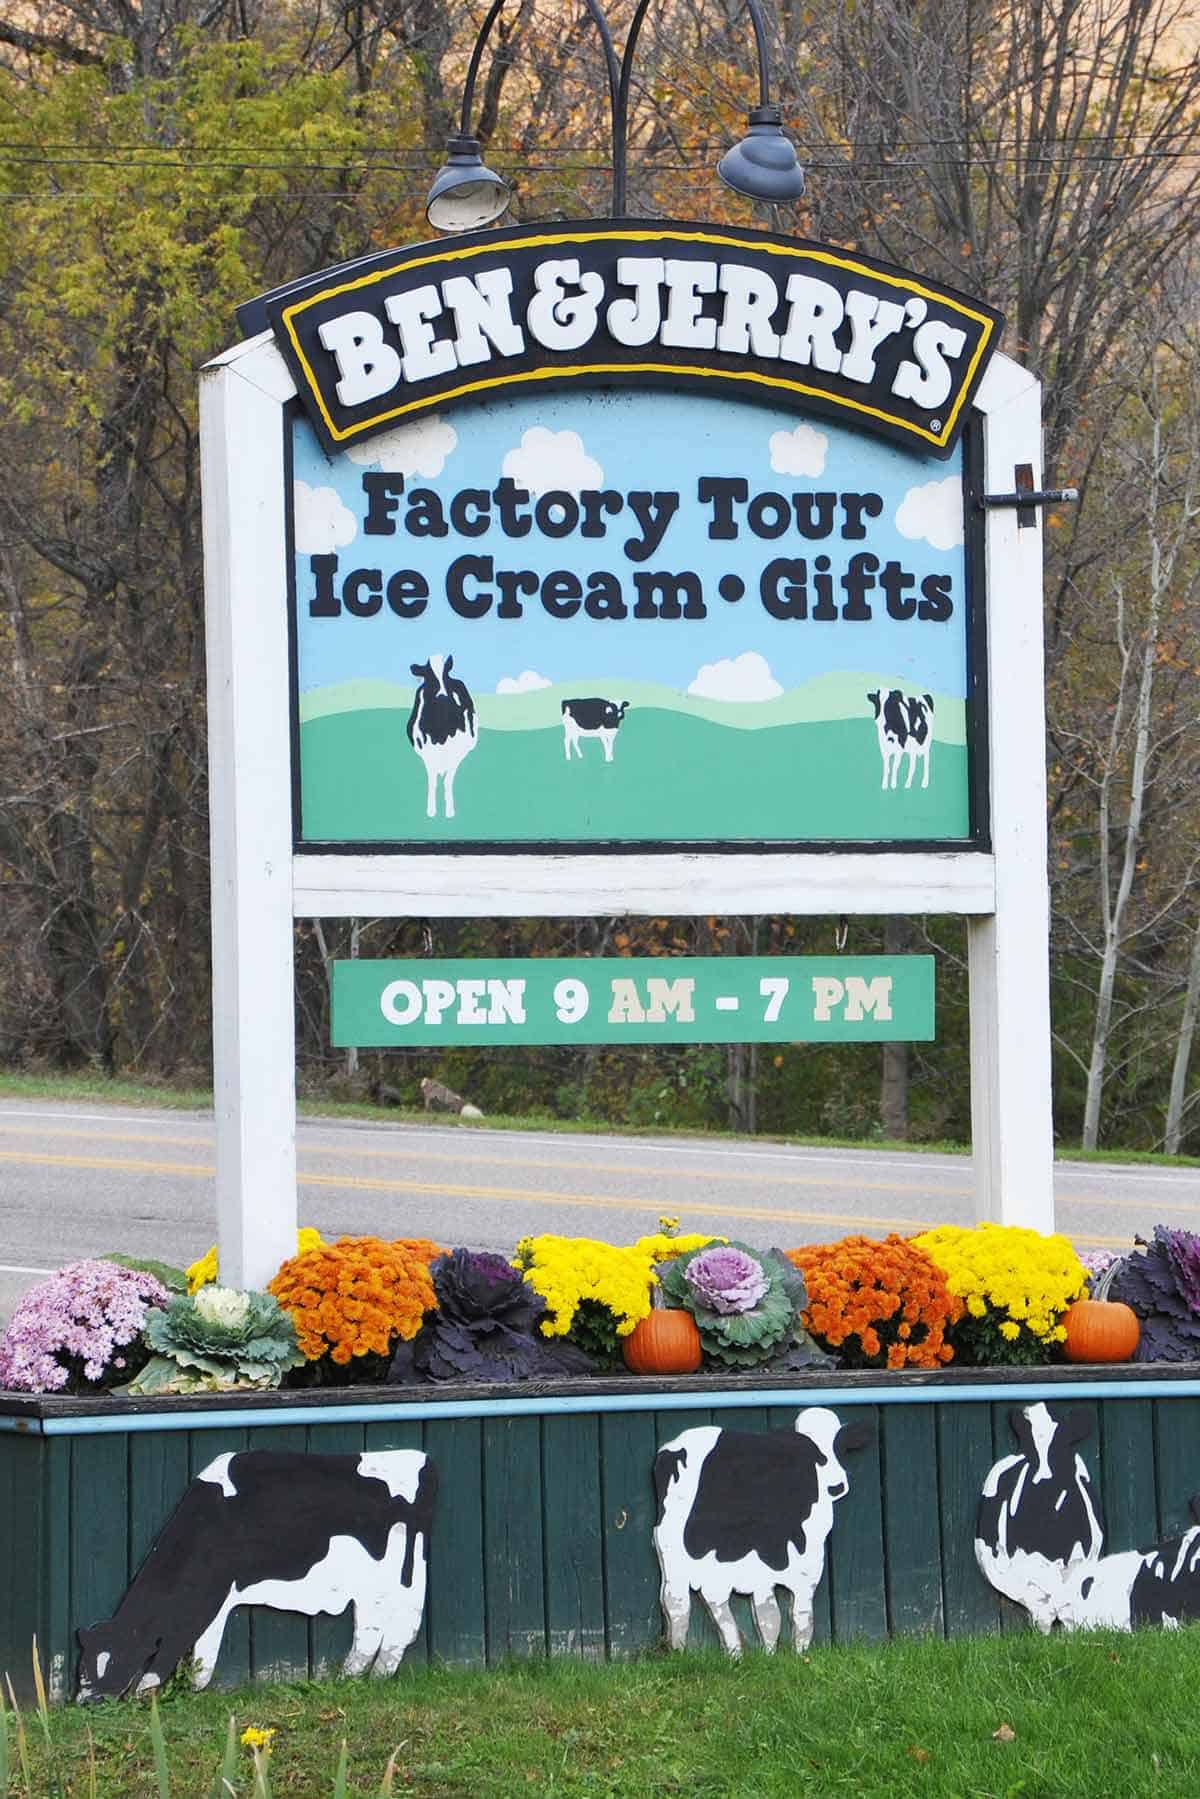 The sign for Ben & Jerry's factory tour.